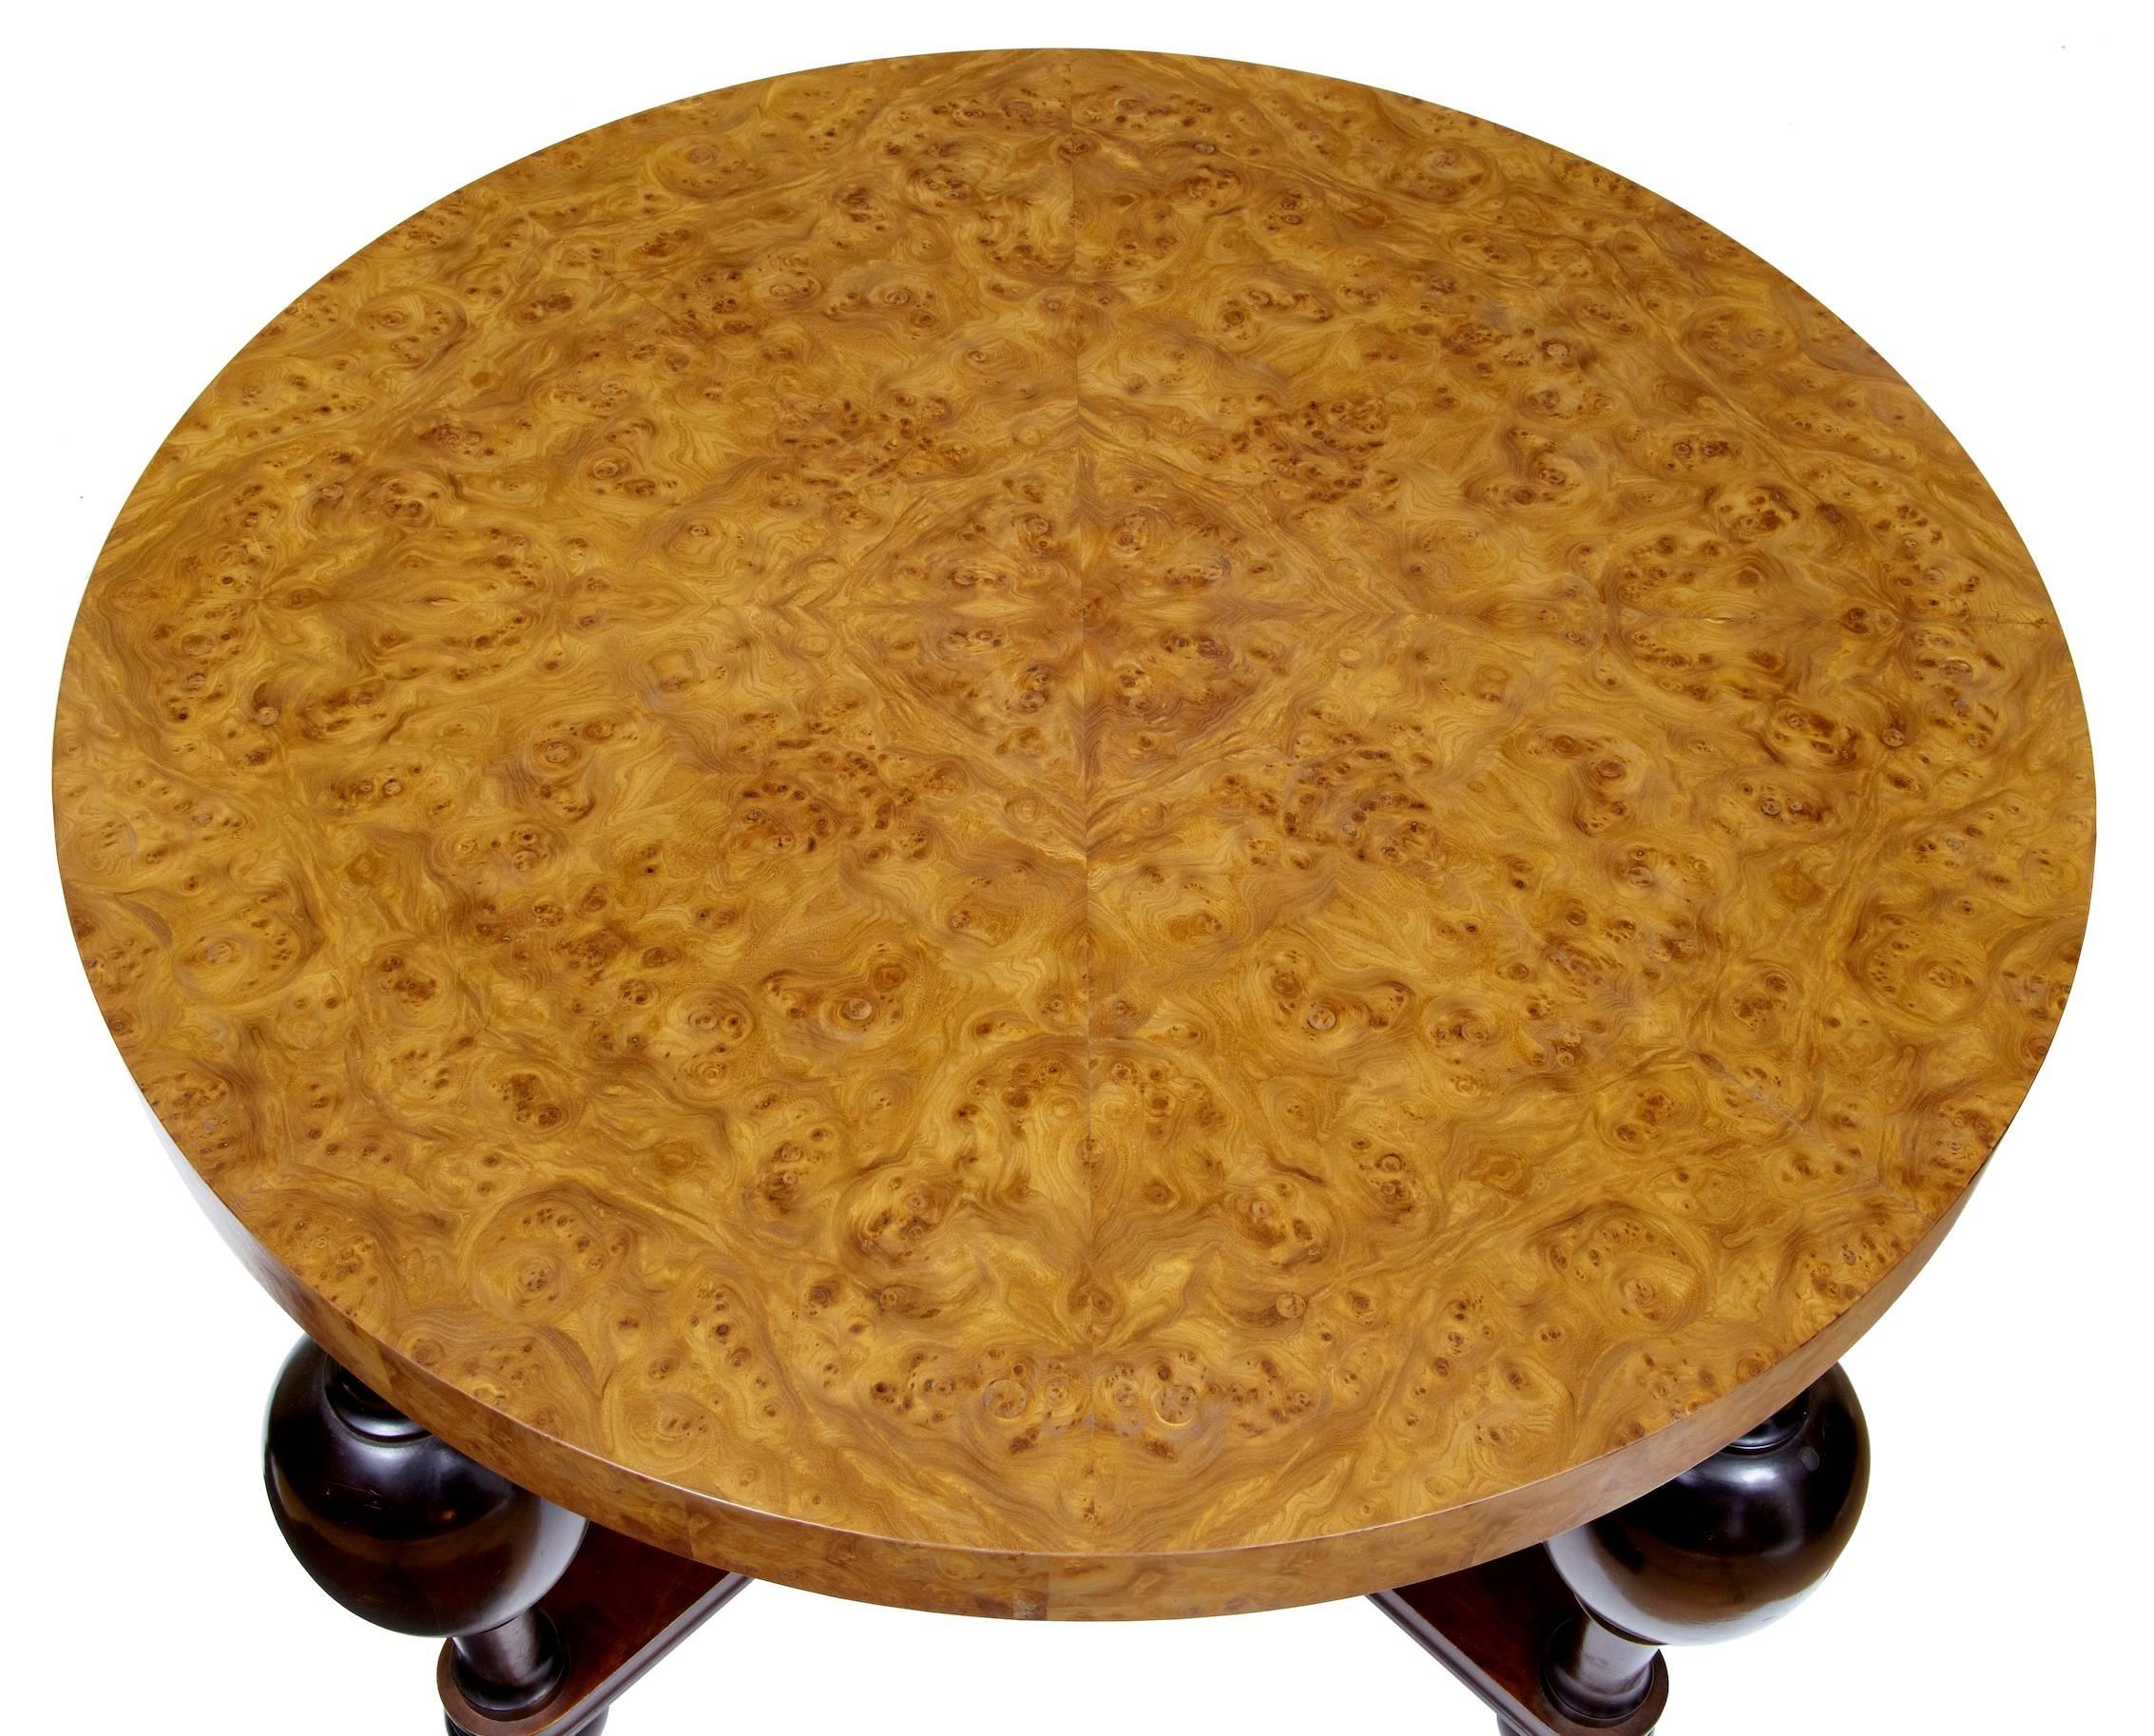 Stunning burr elm veneer top Swedish coffee table, circa 1930s. Standing on bulbous turned legs united by a x frame stretcher.

Measures: Height: 24 1/2